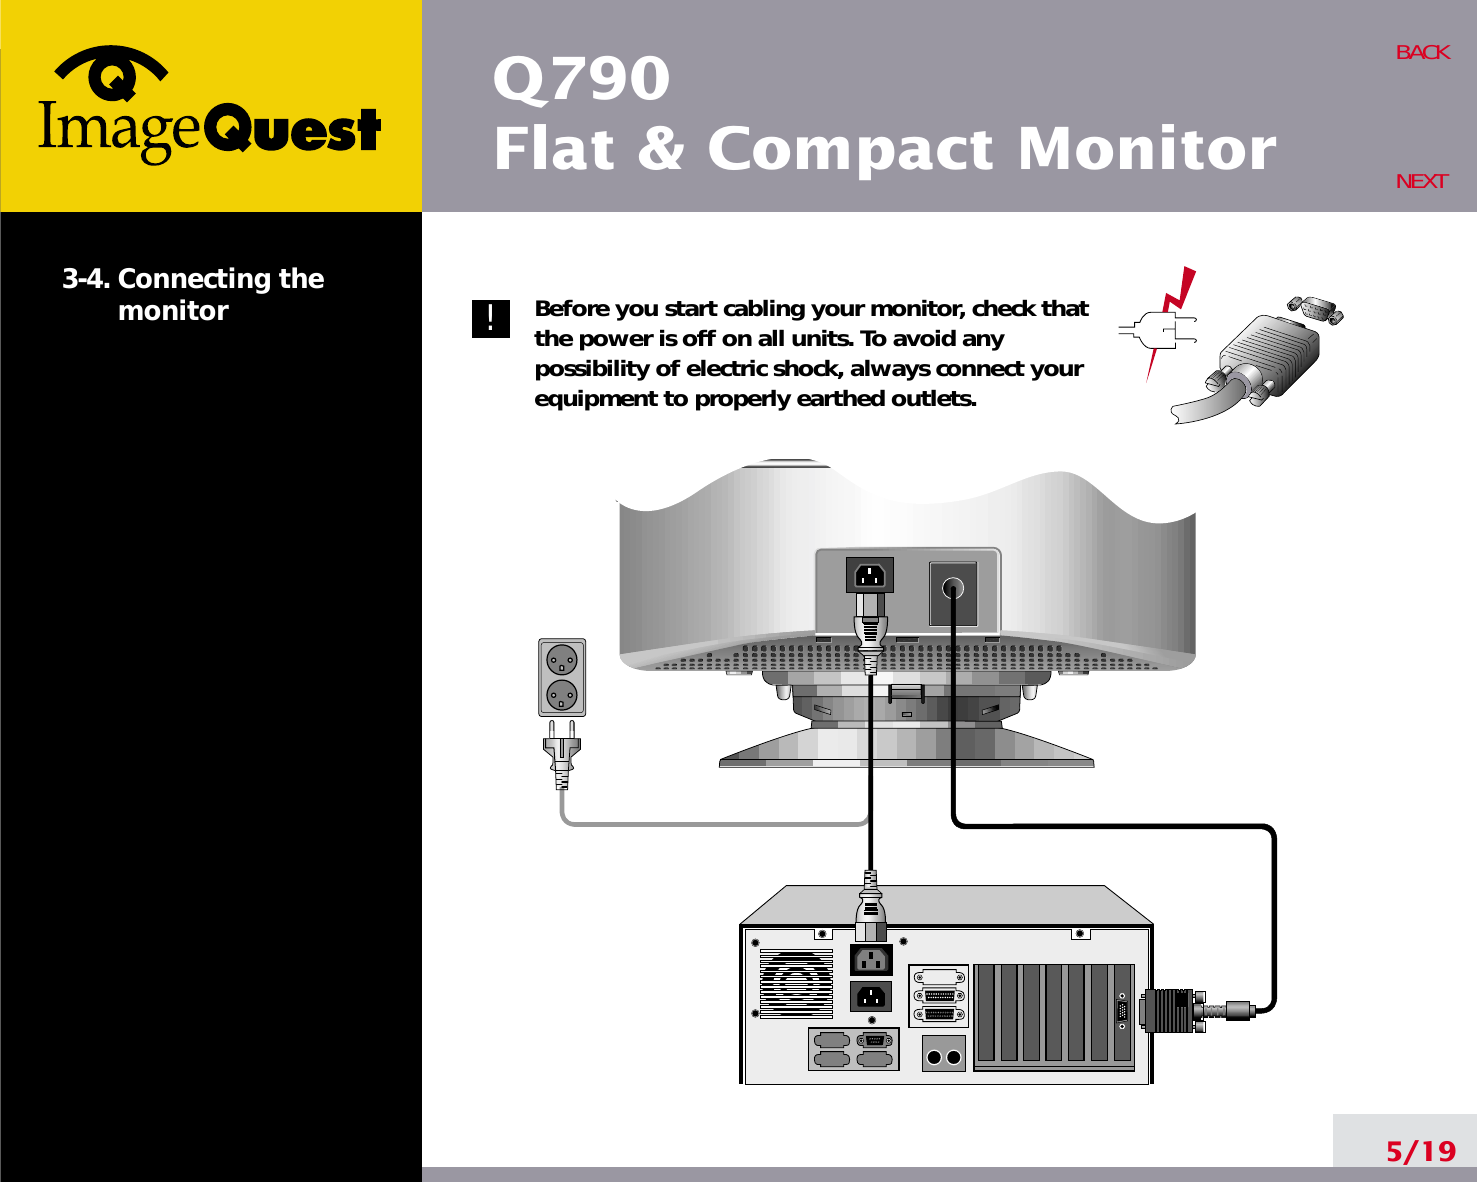 5/19BACKNEXT3-4. Connecting themonitor Before you start cabling your monitor, check thatthe power is off on all units. To avoid anypossibility of electric shock, always connect yourequipment to properly earthed outlets.!Q790Flat &amp; Compact Monitor